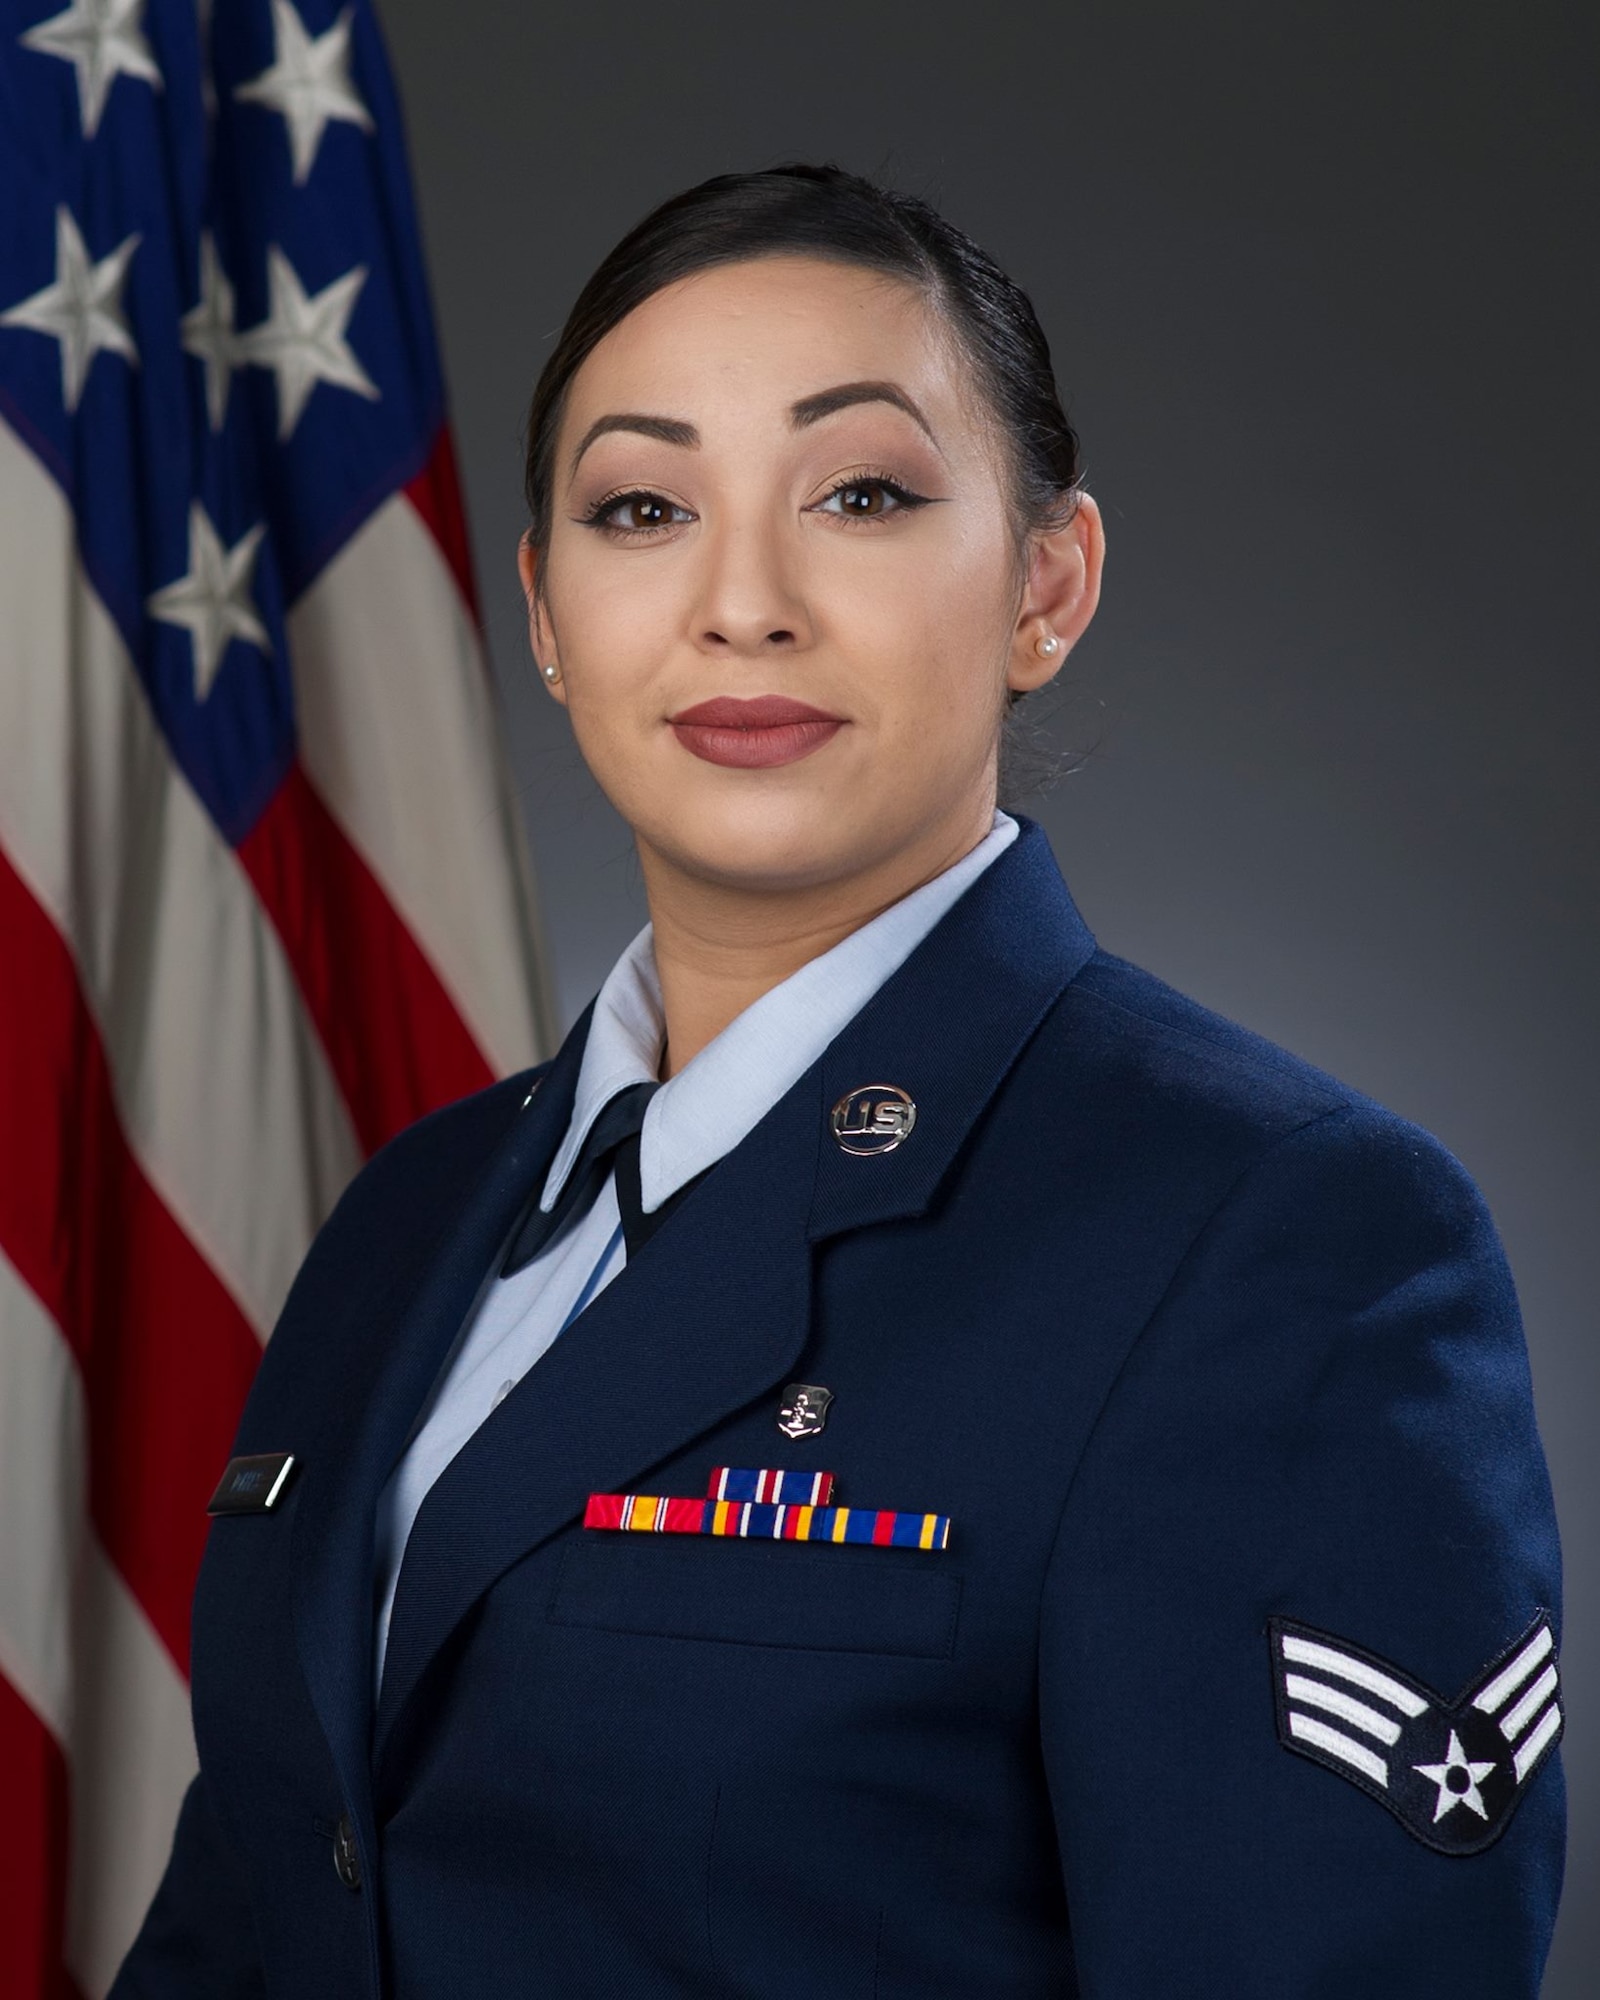 The Air Force Reserve Command named Senior Airman Erica Torres, 349th Aeromedical Staging Squadron, as the command's nominee for the 2016 Noncommissioned Officers Association Vanguard Award. (U.S. Air Force photo)